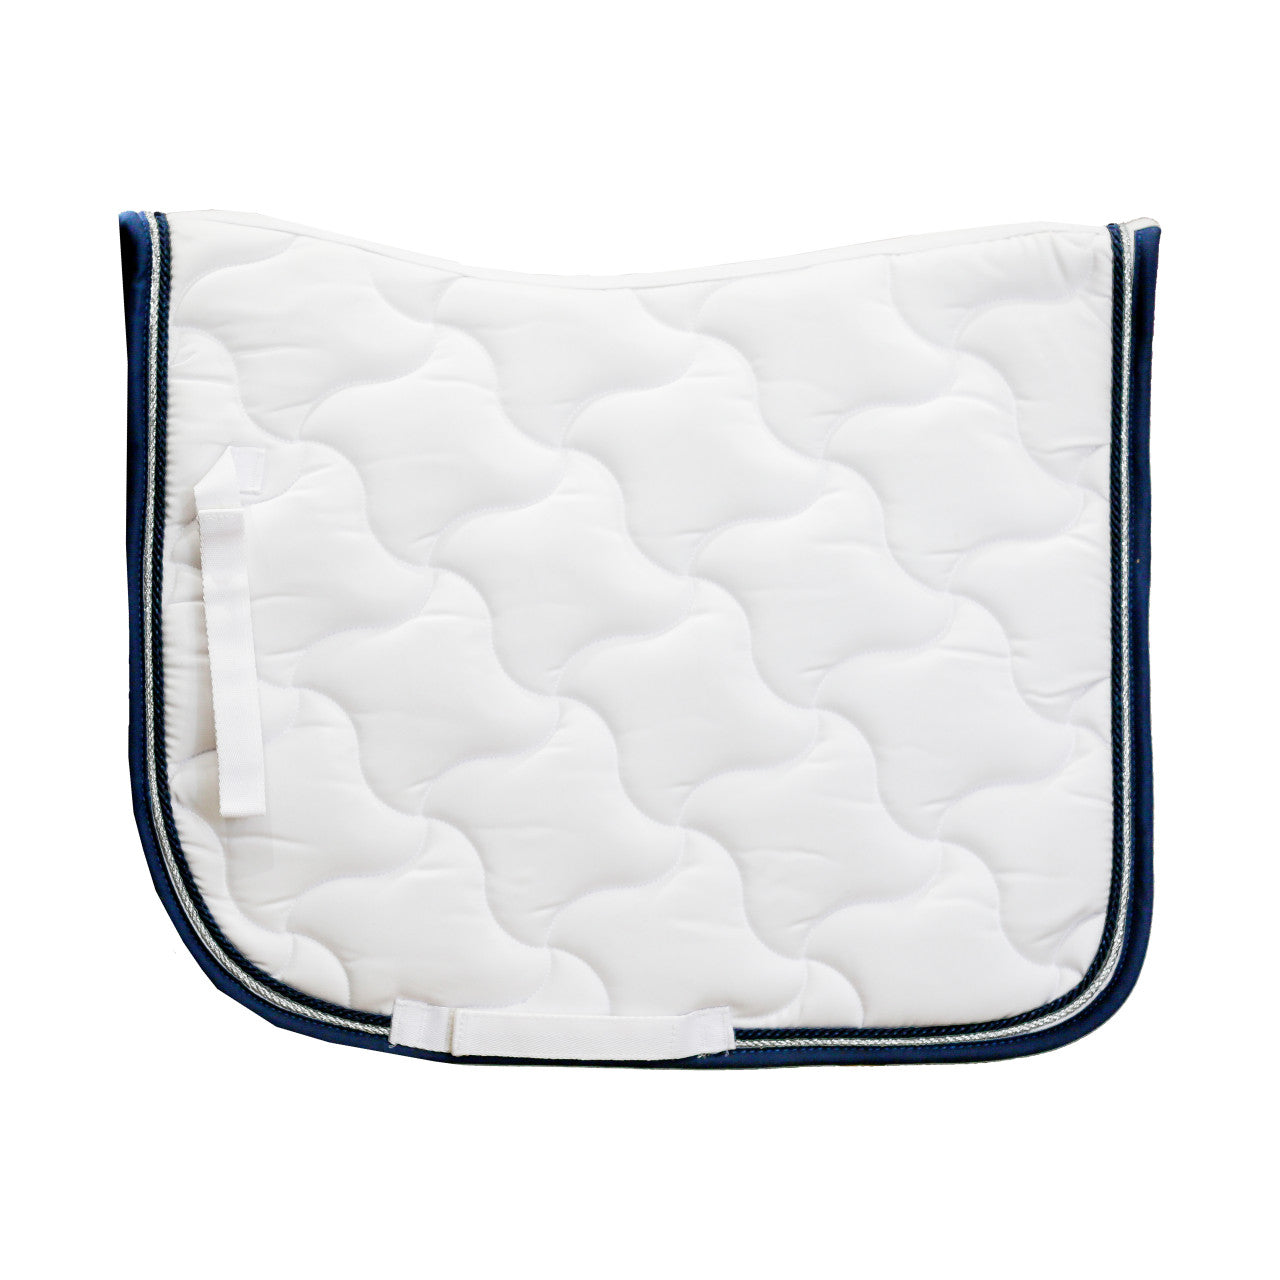 Competition White Dressage Saddle Pad - Navy Binding  - SECONDS - EXPHOTO SHOOT STOCK